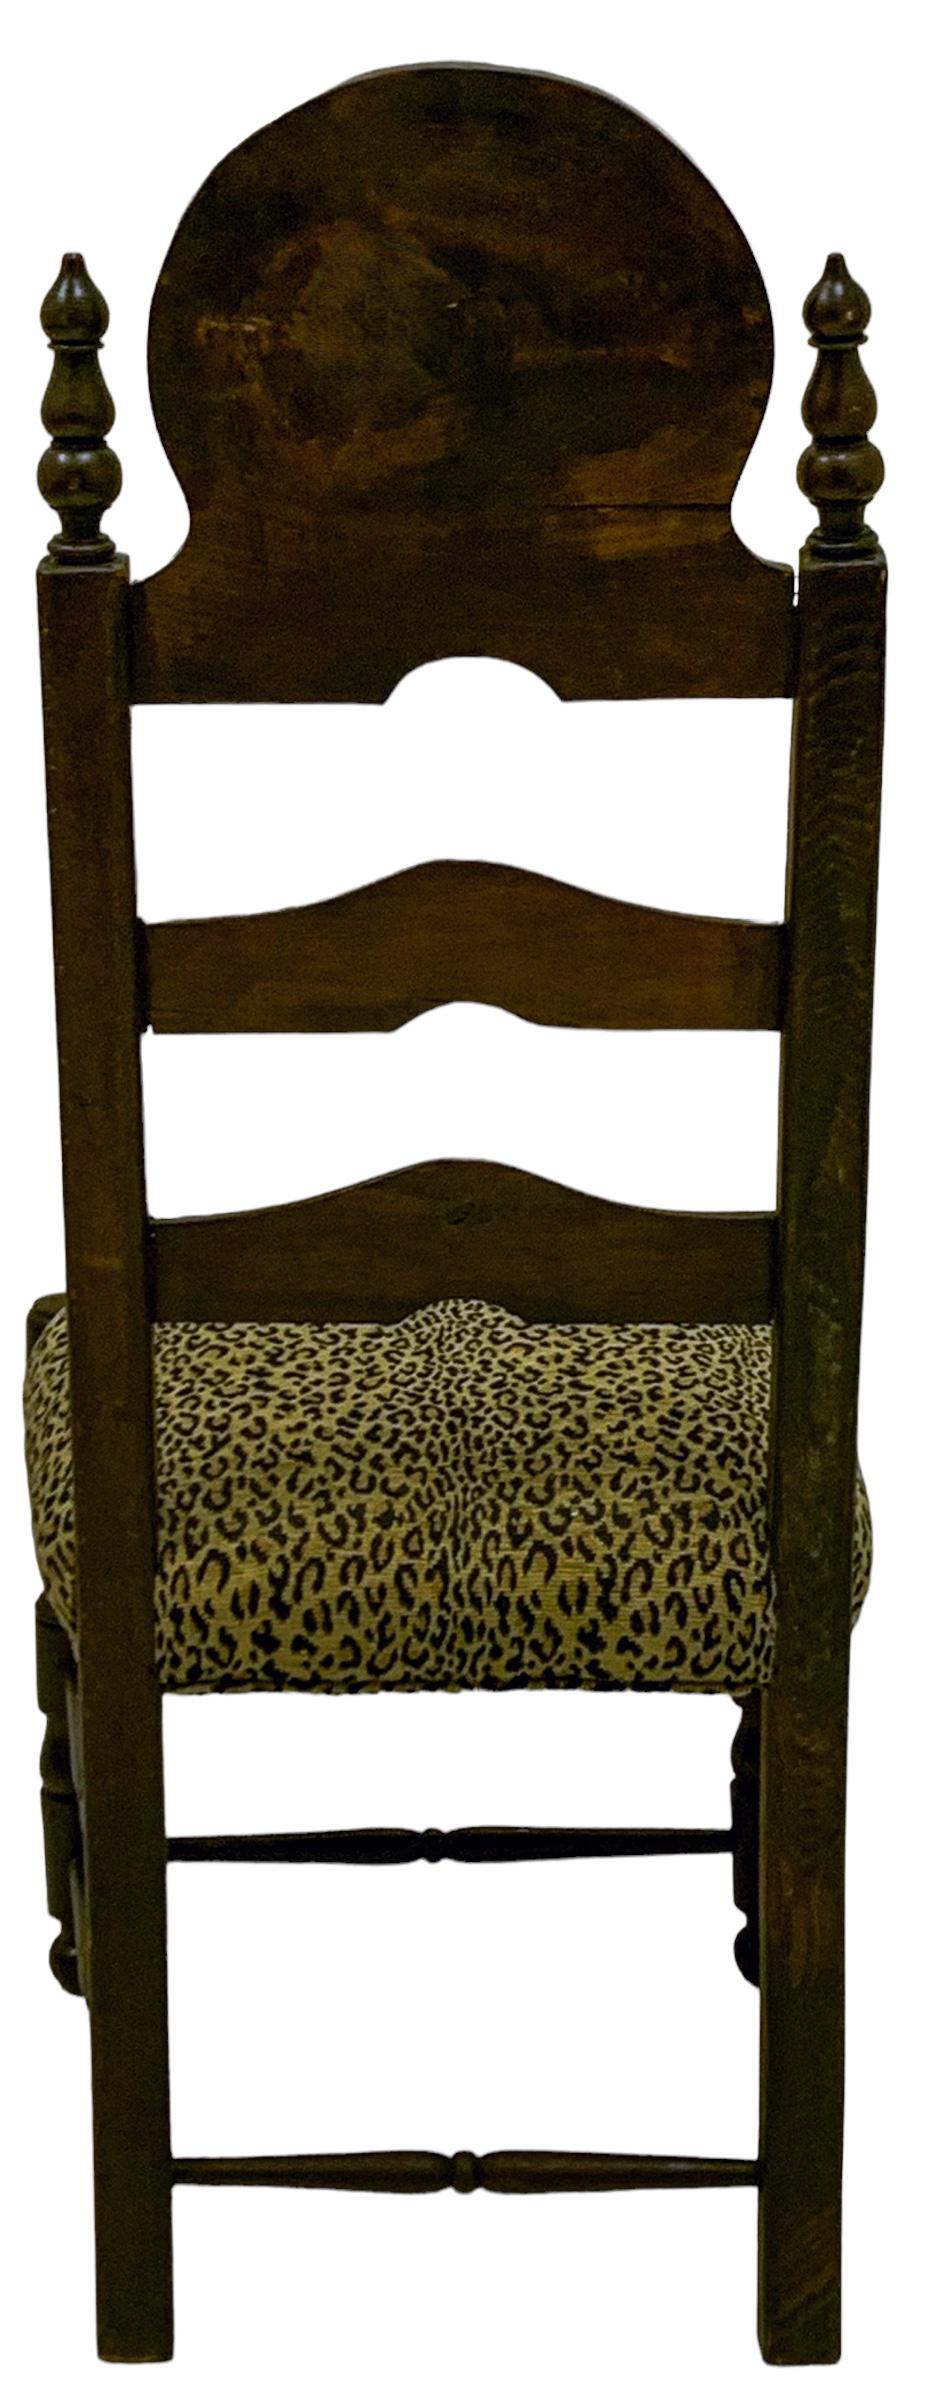 19th-C. French Carved Oak Ladder Back Side Chairs In Vintage Leopard - Pair In Good Condition For Sale In Kennesaw, GA